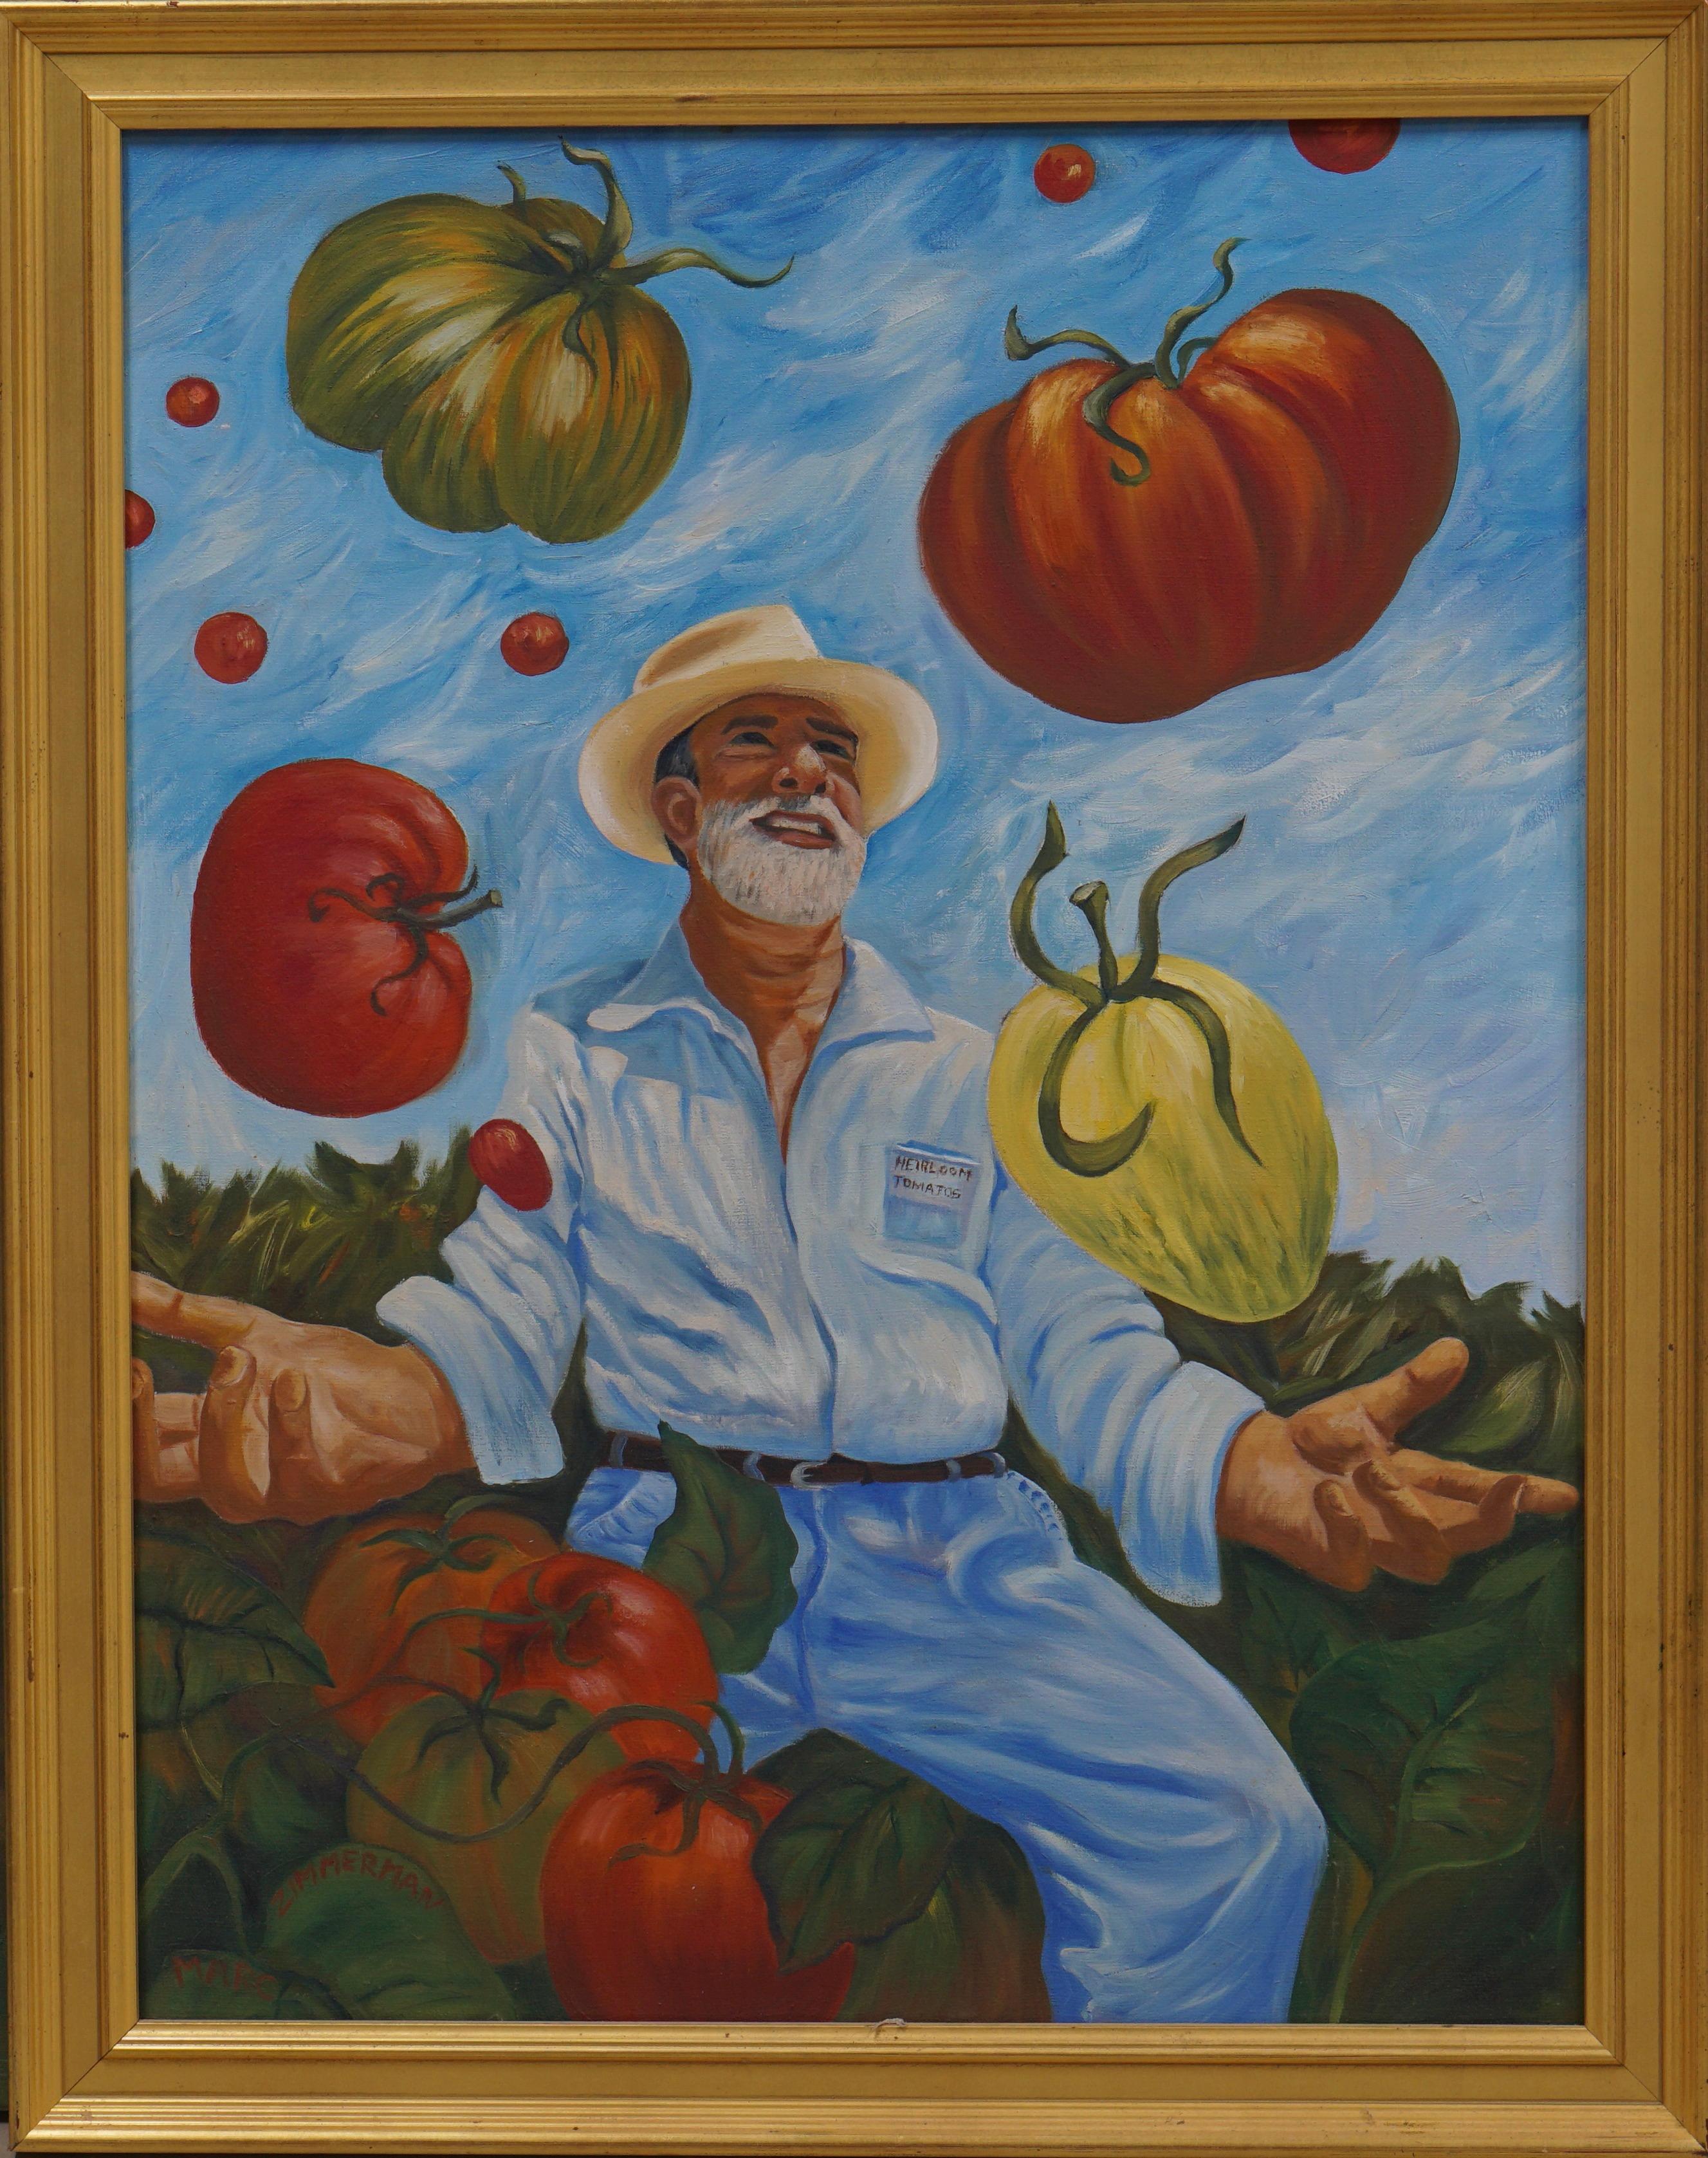 No one could successfully juggle tomatoes except for Gary, one of the founders of heirloom tomatoes. His joy is unbounded here as he miraculously plays with his food. (The artist admits to taking a little artist licence in this painting.)

Tomato